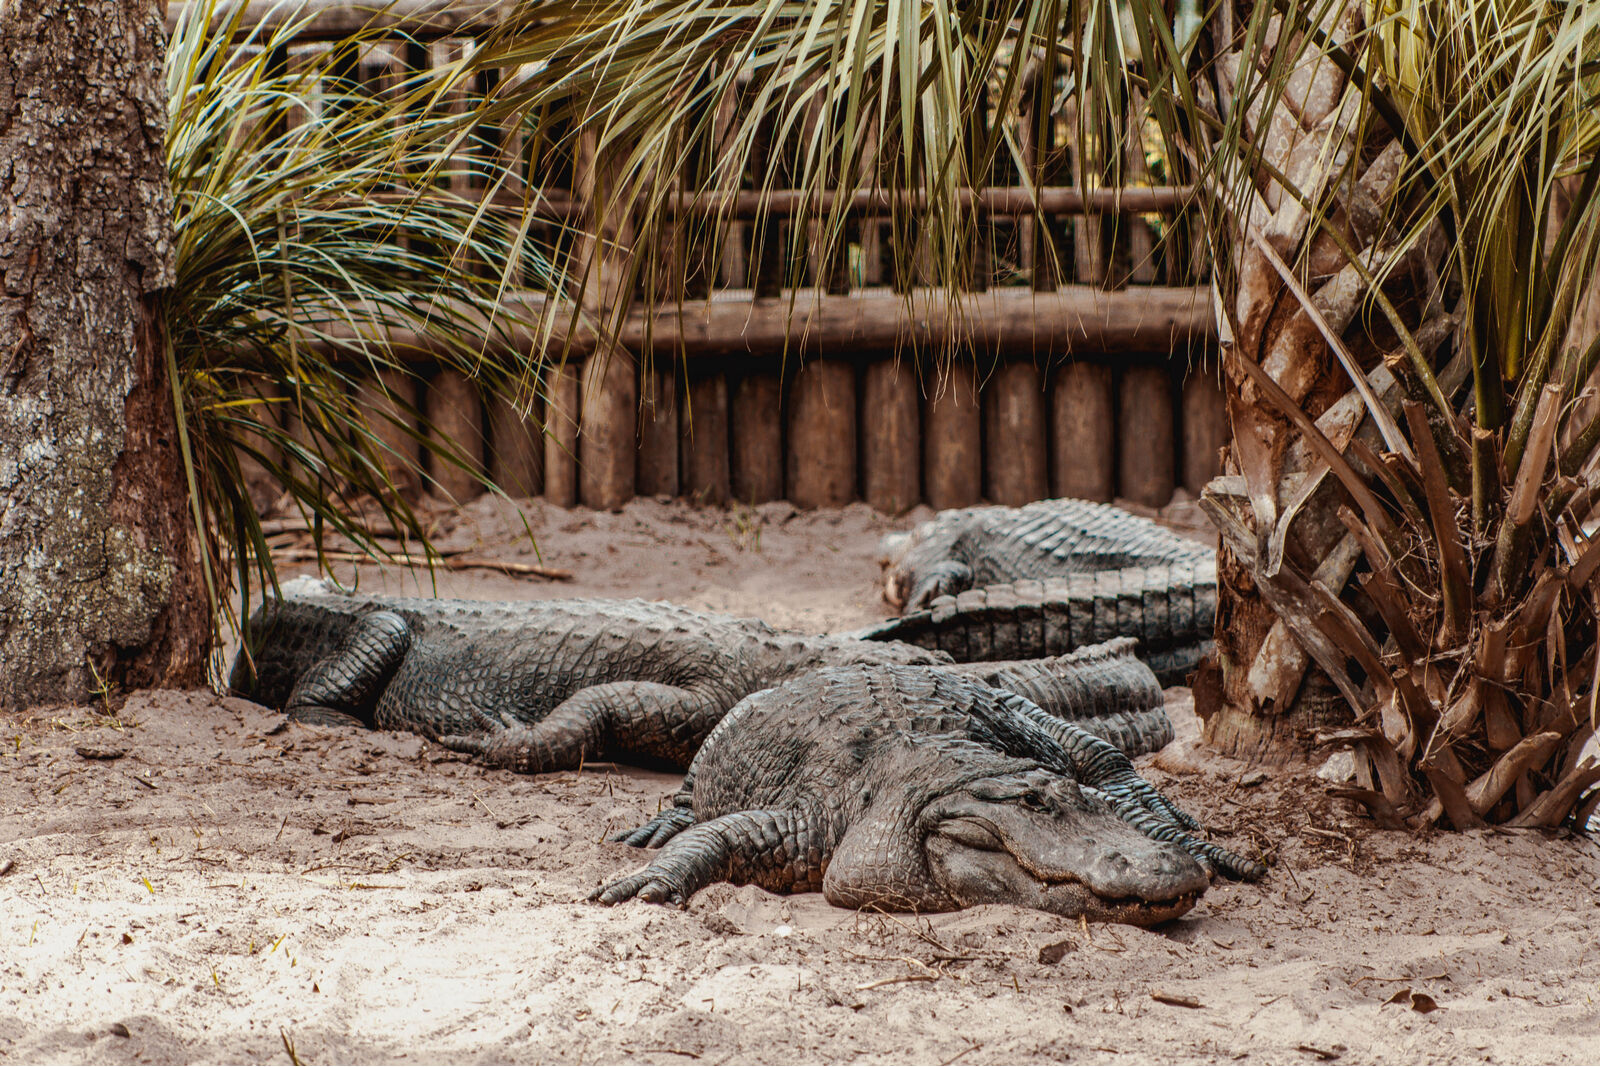 Alligators on a farm in St Augustine